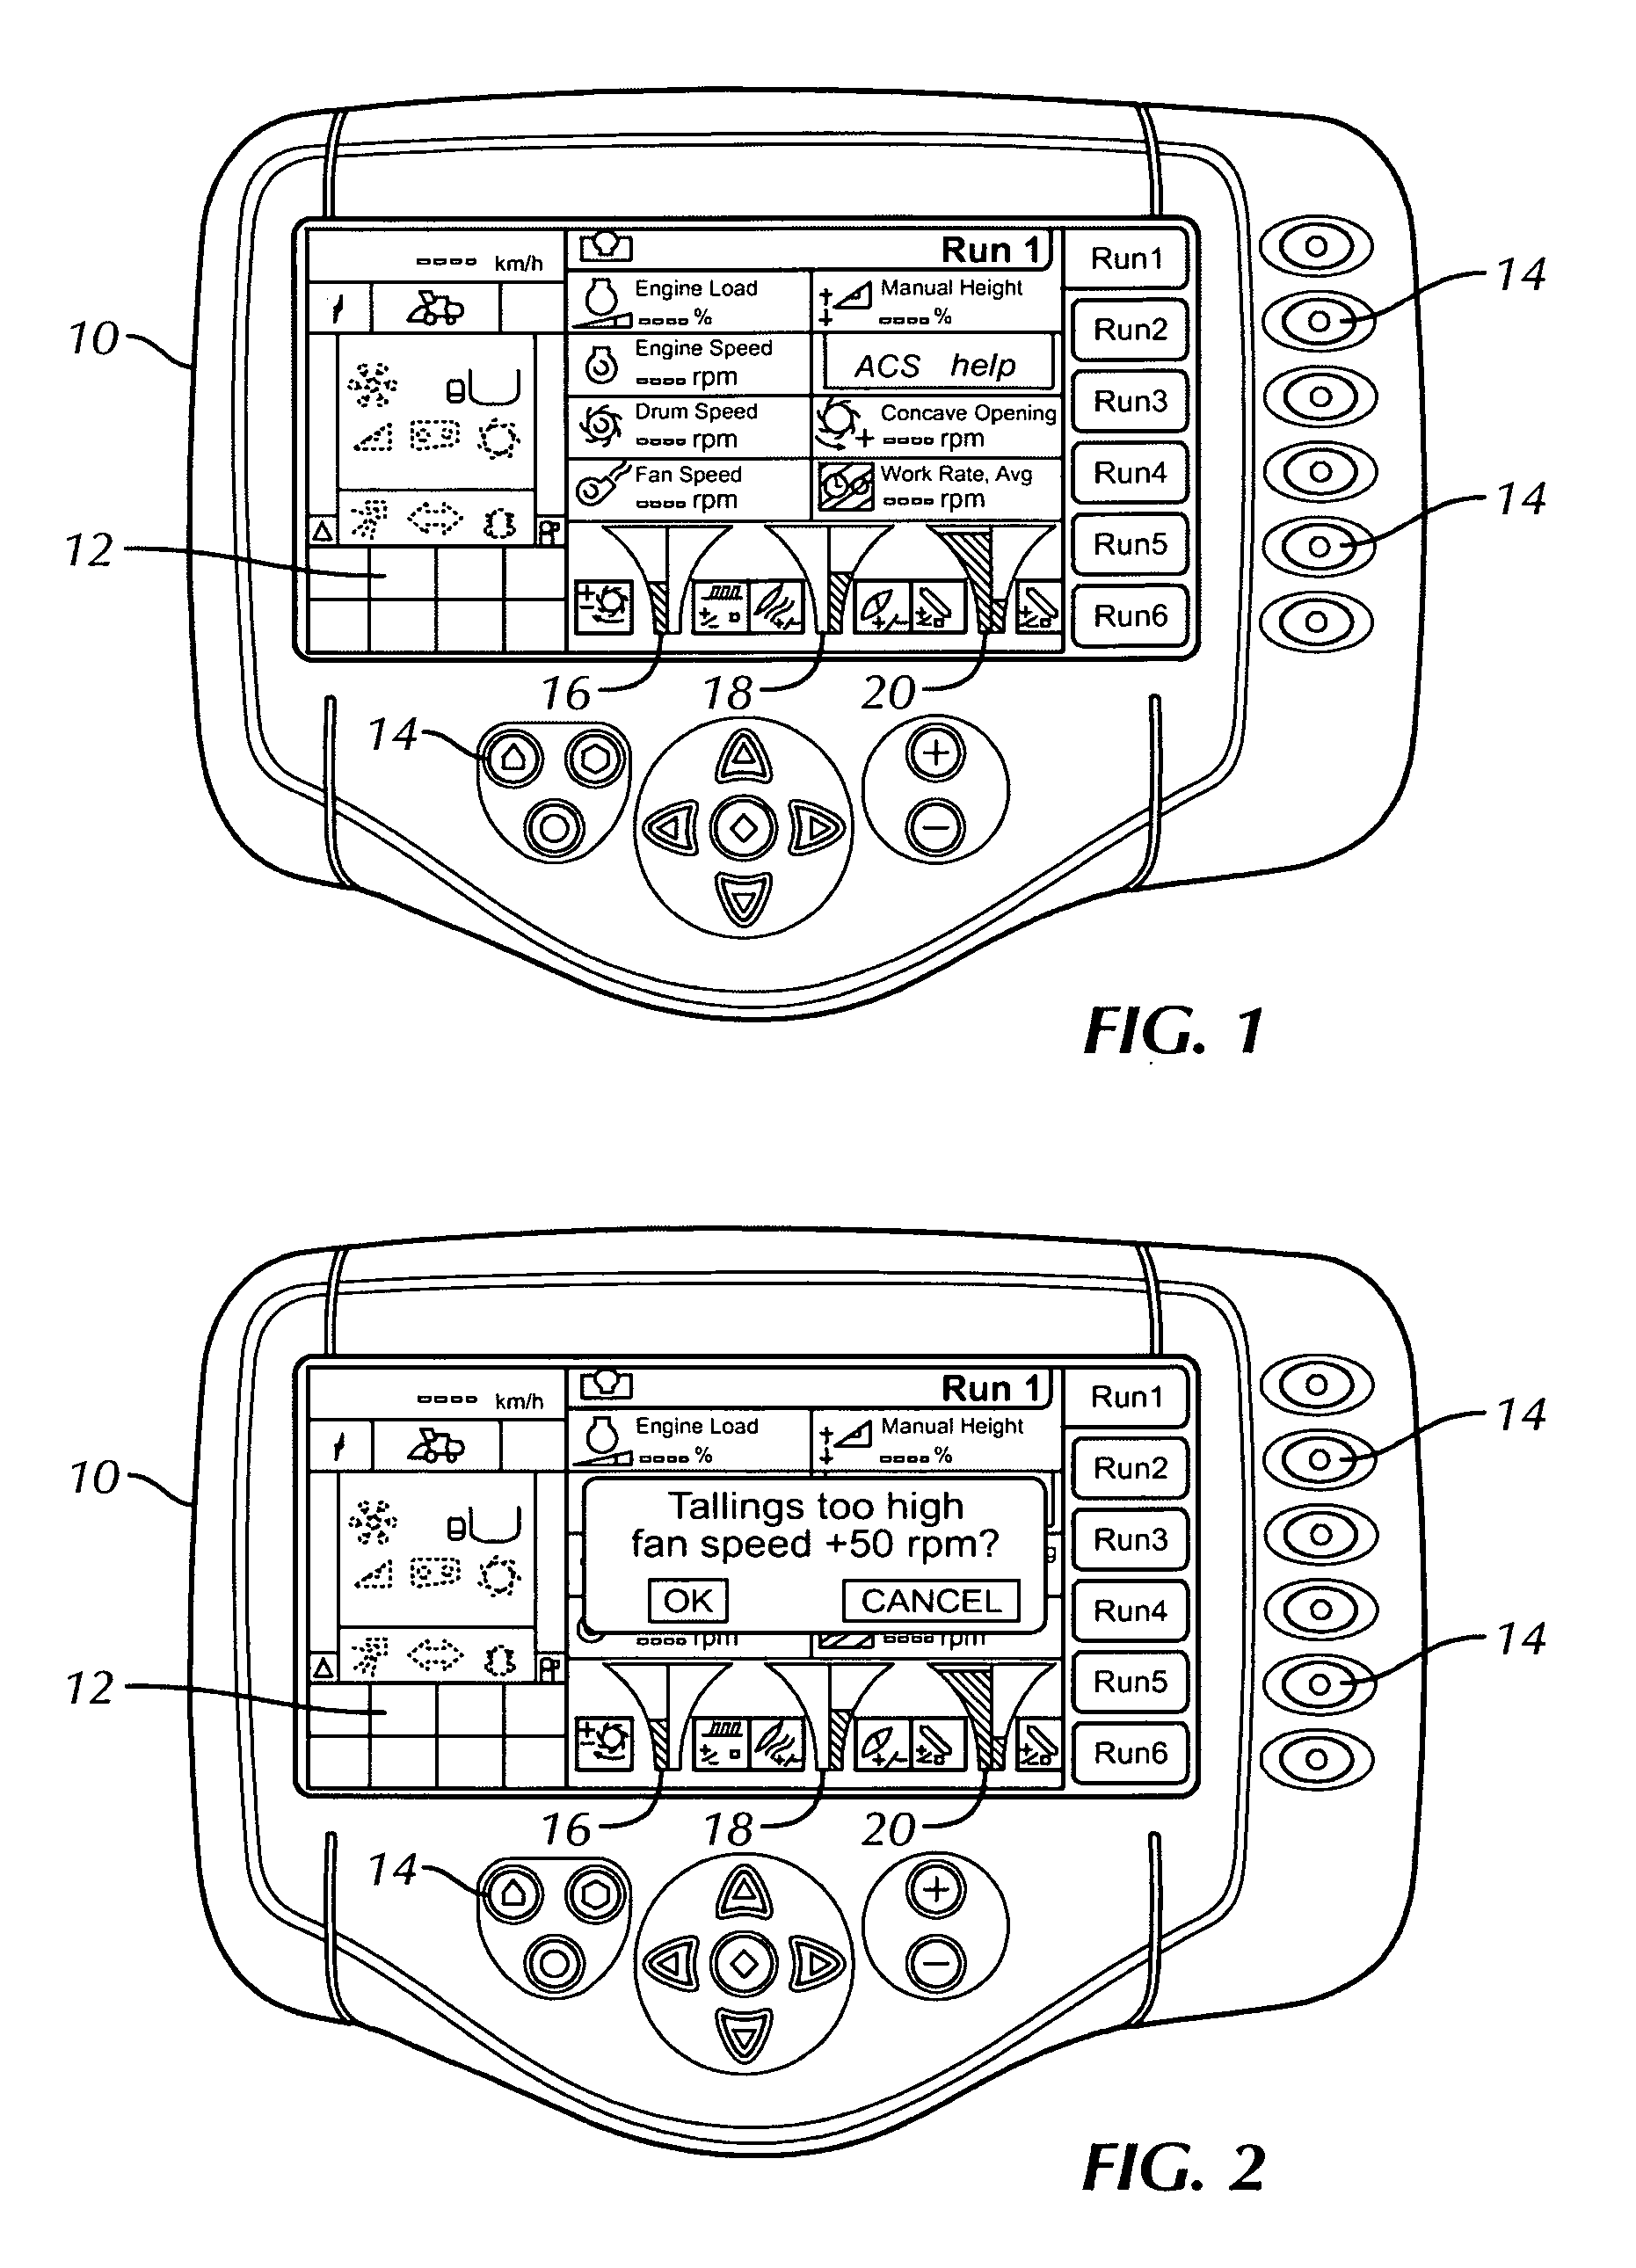 Control system for an agricultural harvesting machine